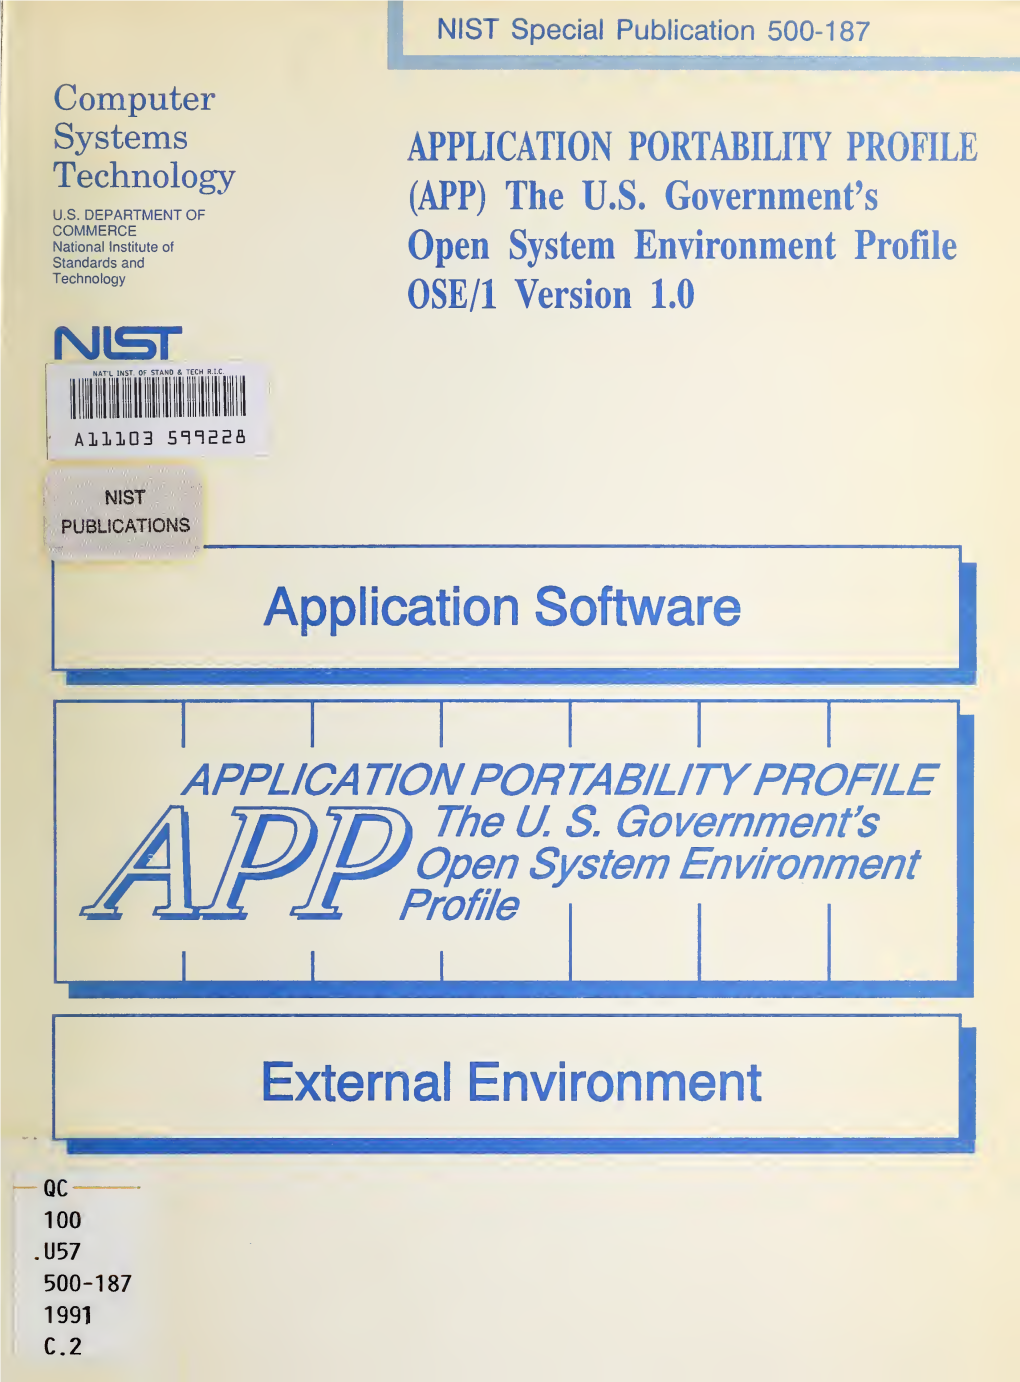 APPLICATION PORTABILITY PROFILE (APP) the U.S. Government's Open System Environment Profile OSE/1 Version 1.0